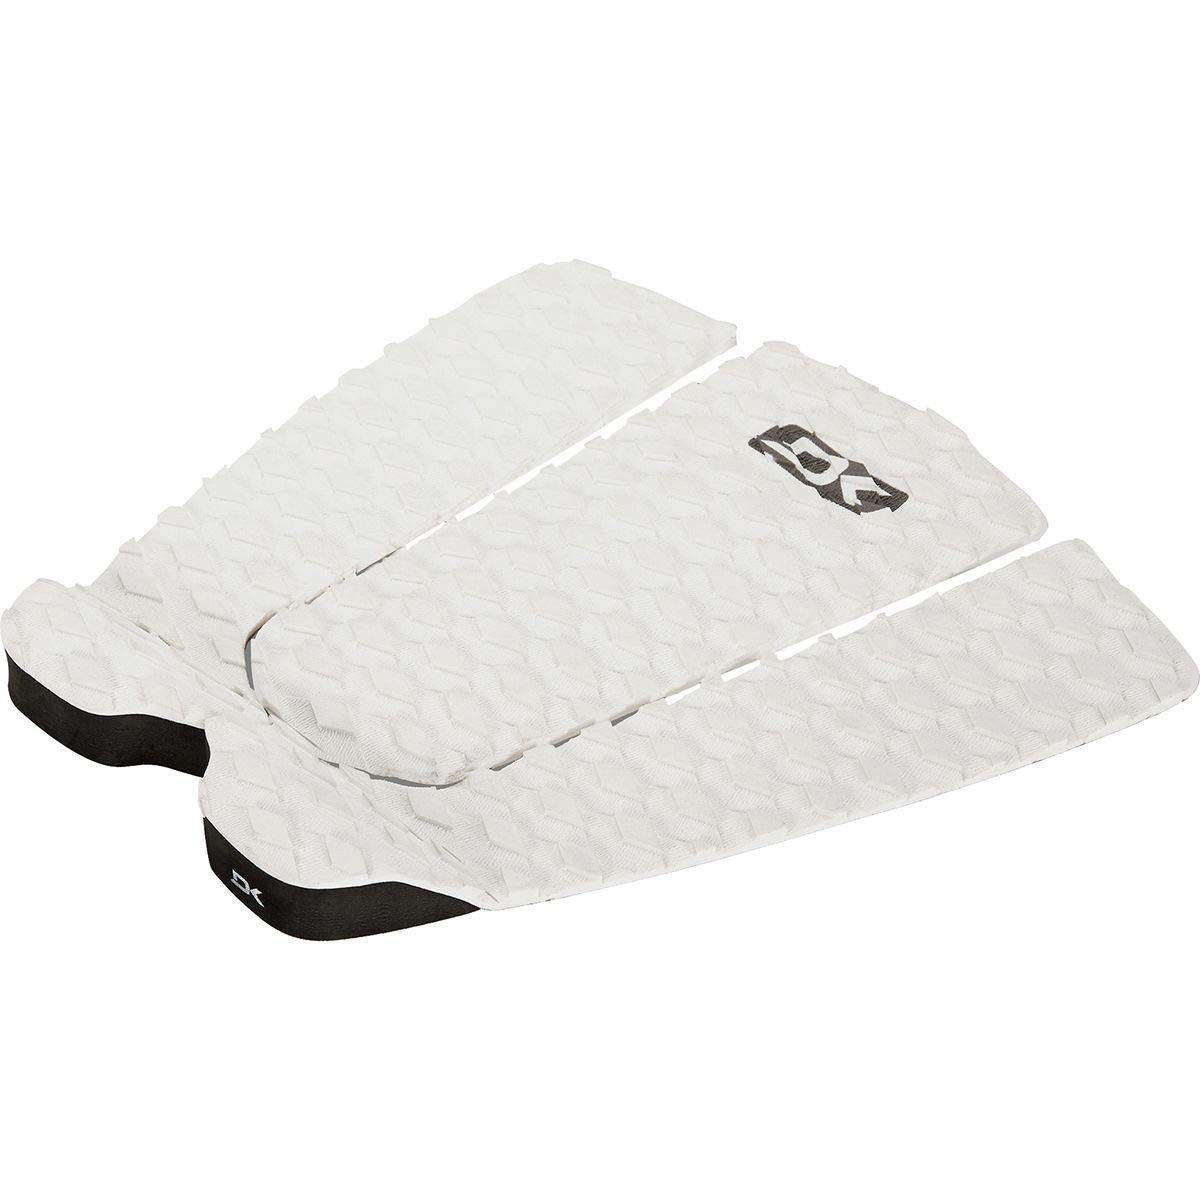 Dakine Andy Irons Pro Traction Pad 100-White